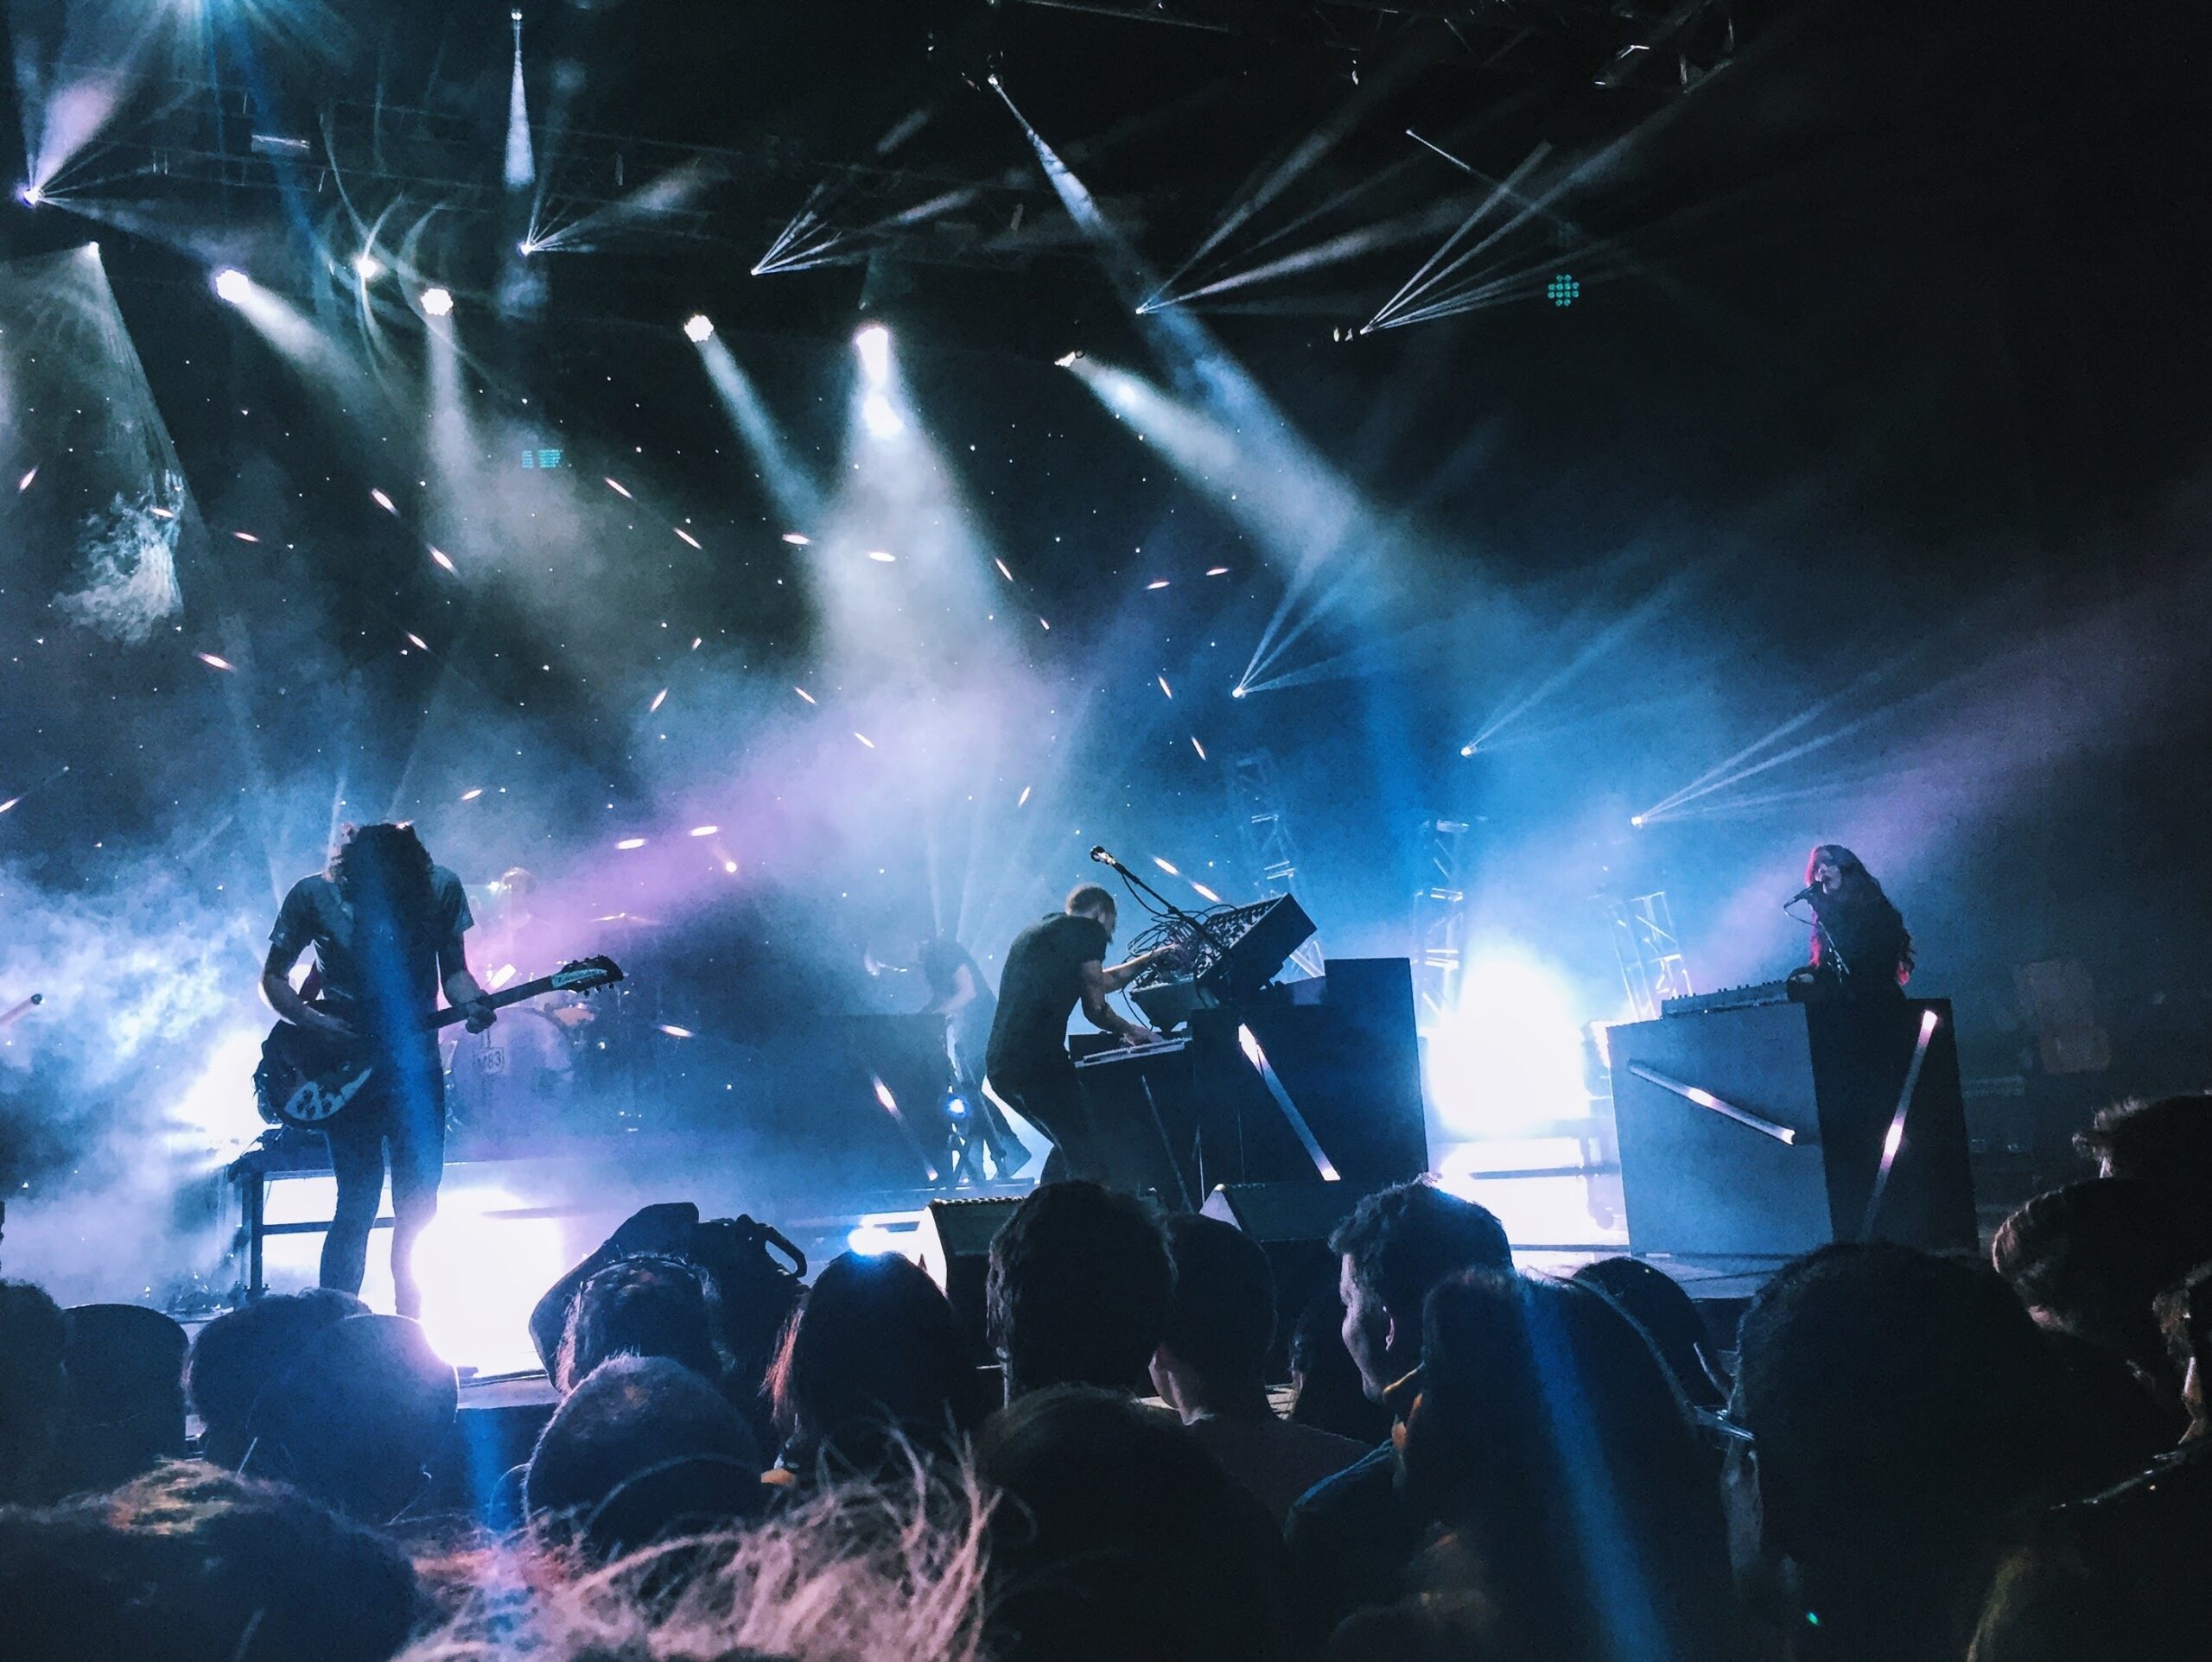 Image depicts a band playing onstage. Used as a cover photo for an article overview of ANote Music. ANote Music is a music royalty investing platform based out of the EU.